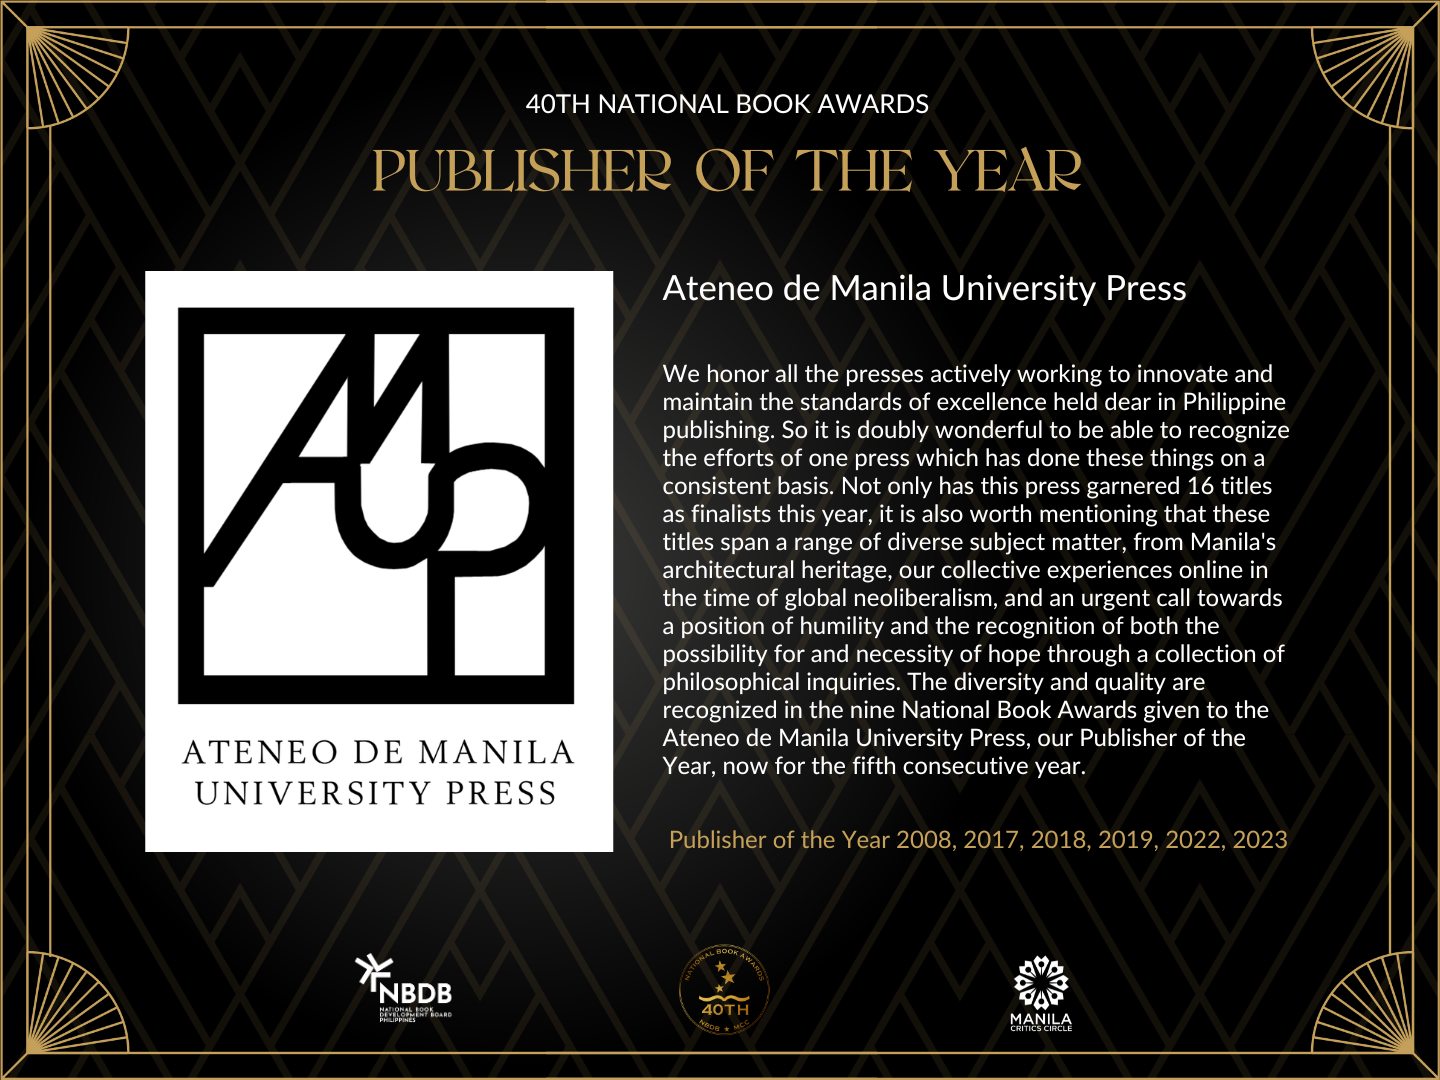 Citation from the National Book Development Board for the Ateneo University Press’ Publisher of the Year Award